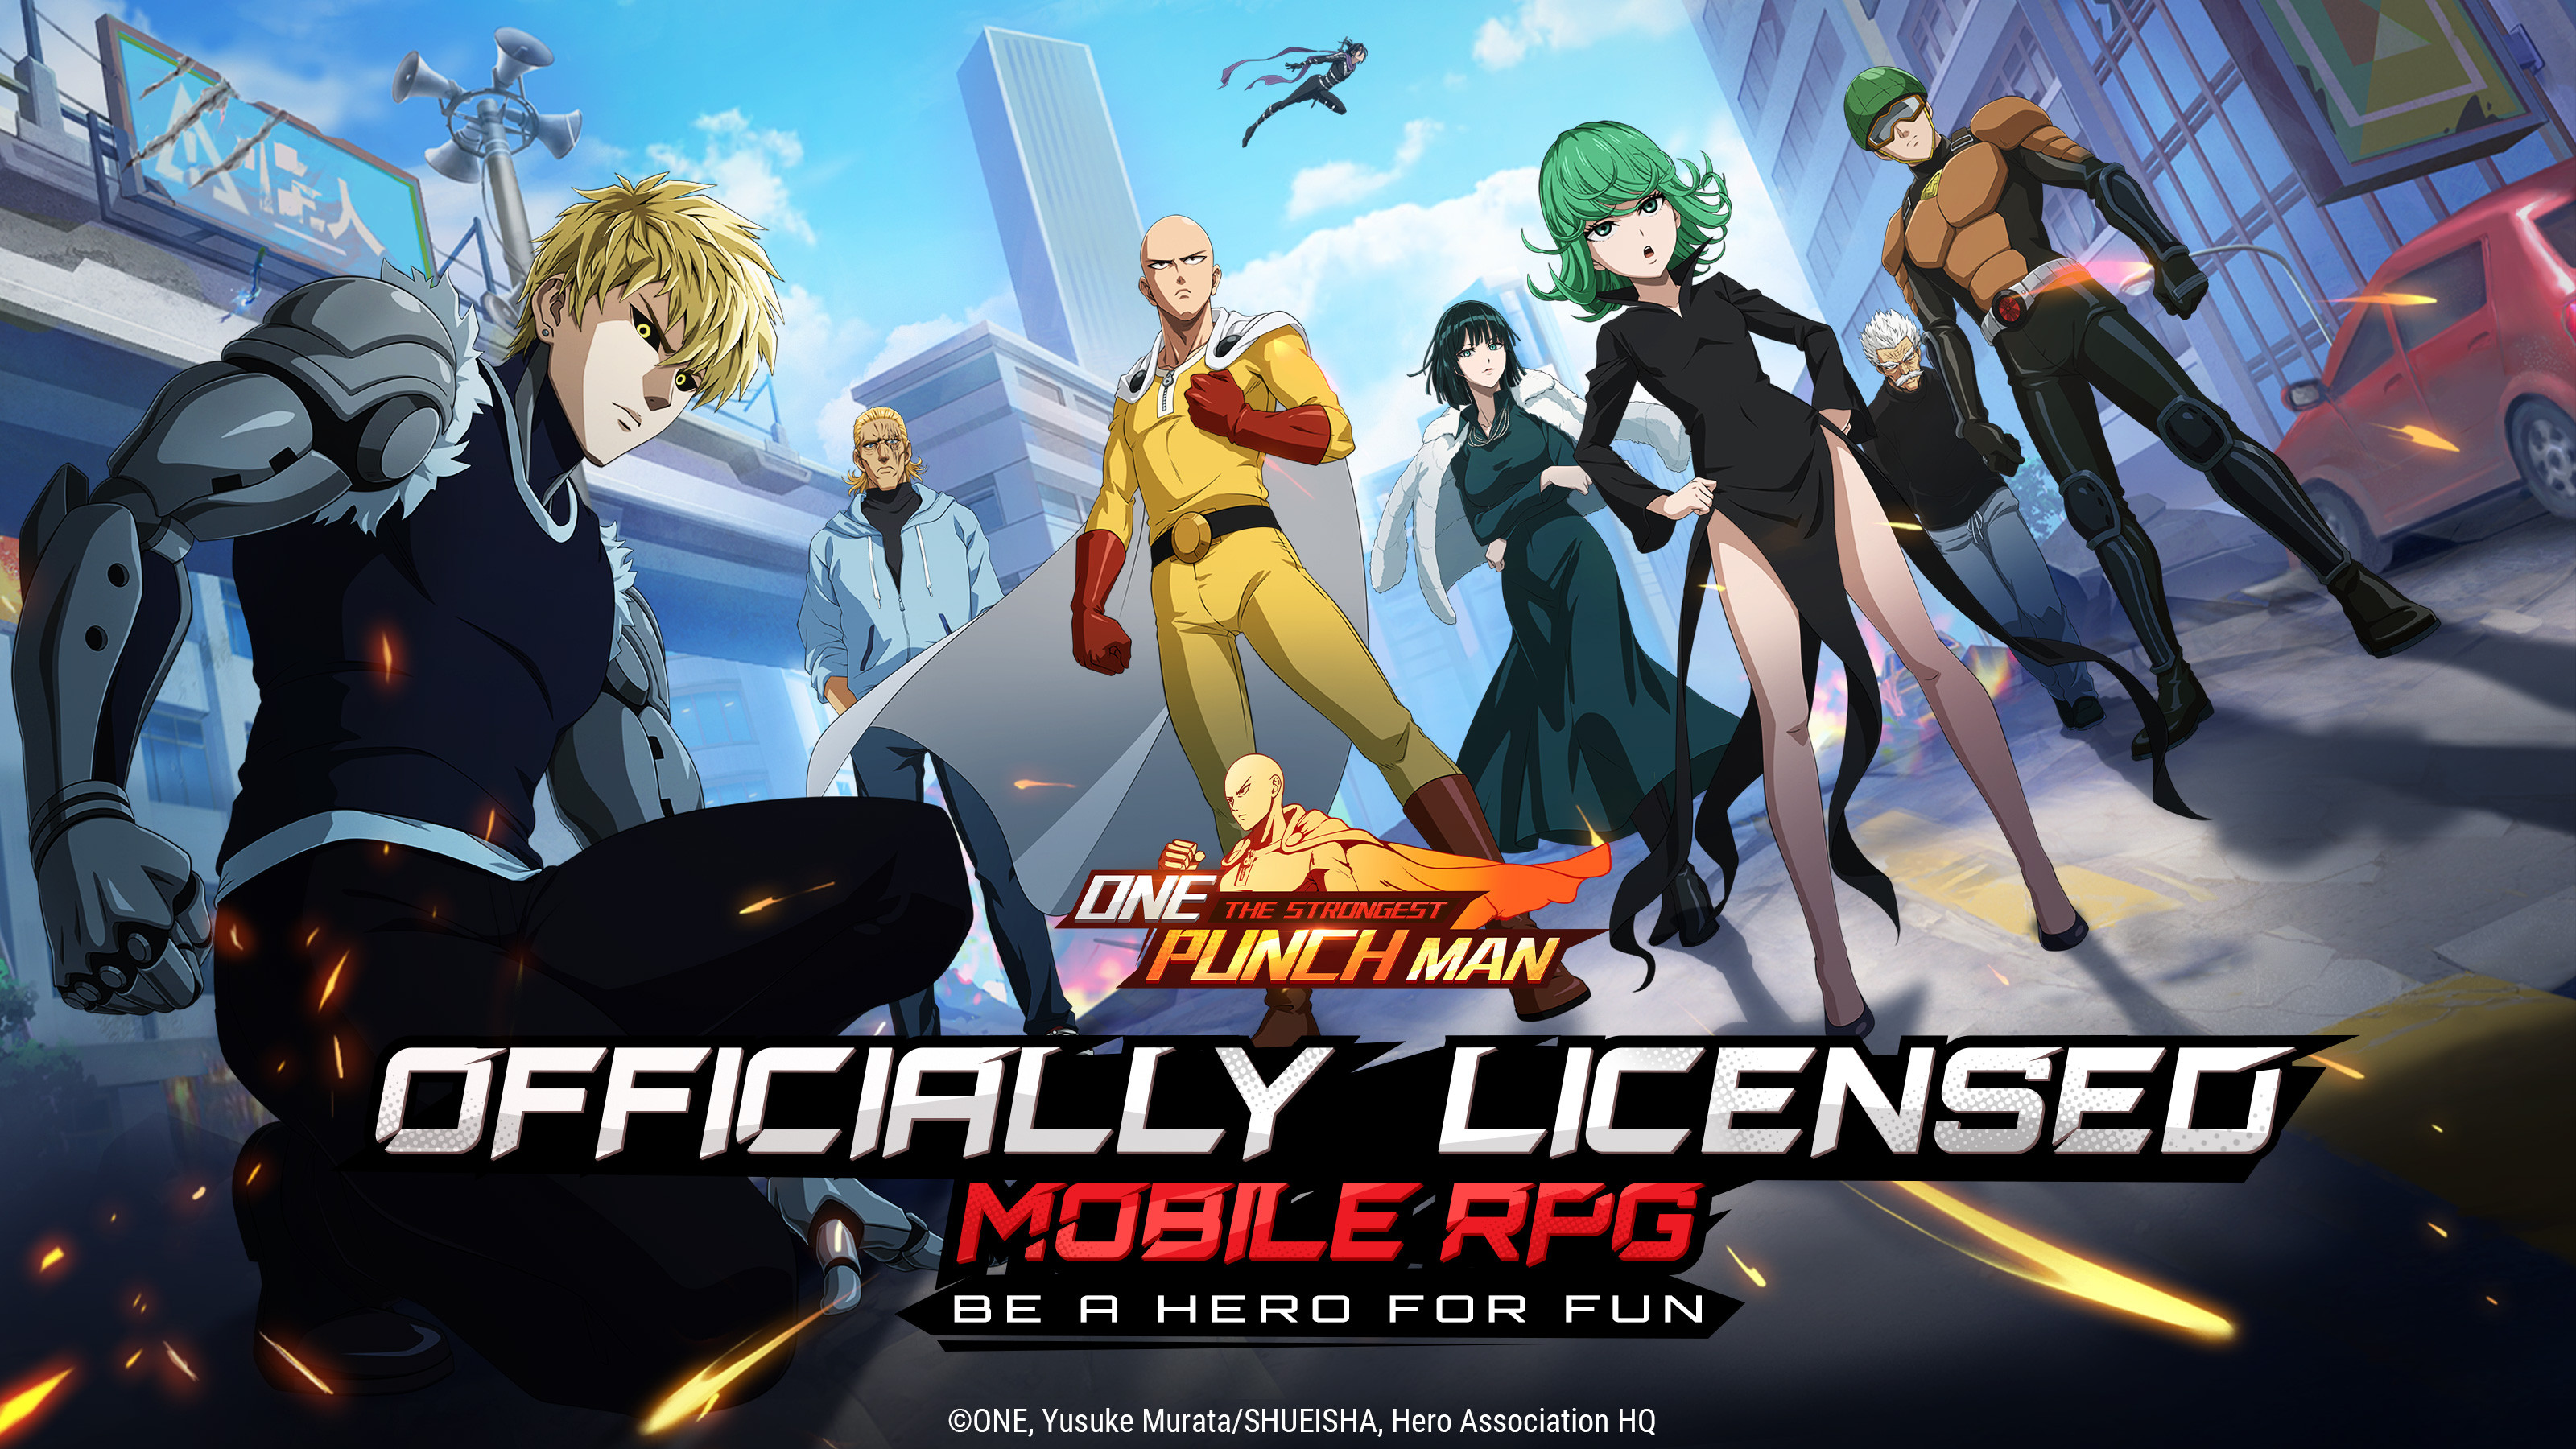 One Punch Man - The Strongest enfin disponible sur Android et IOS !